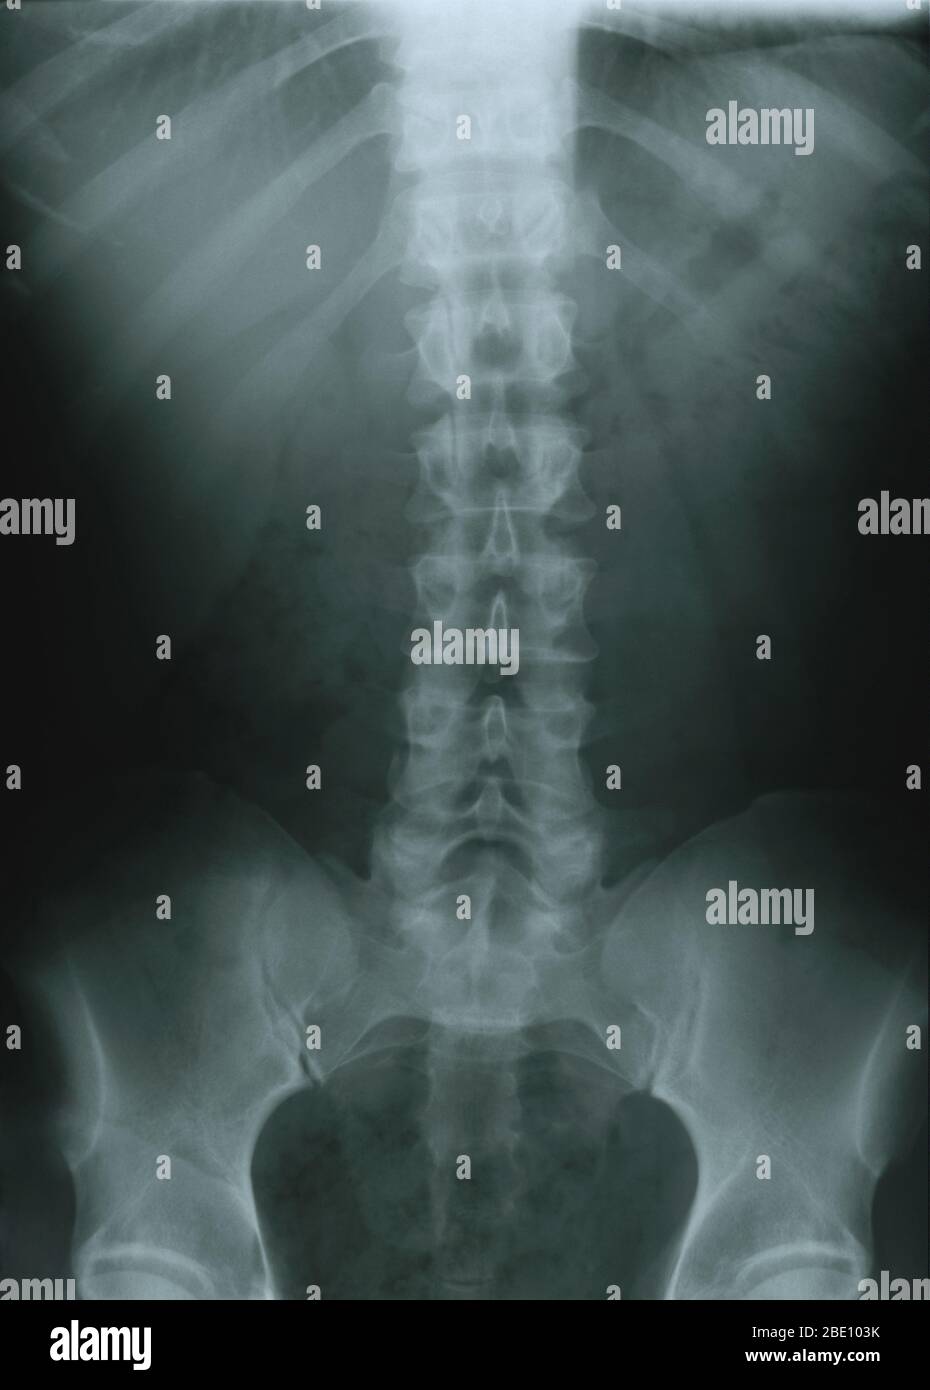 X-ray of lumbar spine of male, age 36. Noticeable is compression of the vertebrae leading to disc herniation. The collagenous disks that are interposed between the vertebrae of the spine act as shock absorbers and most of the body load is transmitted through them. If a disk ruptures (prolapses), it may come to press on a nerve, causing localized pain. A common misconception is that disks can 'slip', when in fact they burst and their gelatinous content is forced through the tough outer sheath that would normally contain it. When the rupture occurs lower down the spine the pain seems to come fro Stock Photo